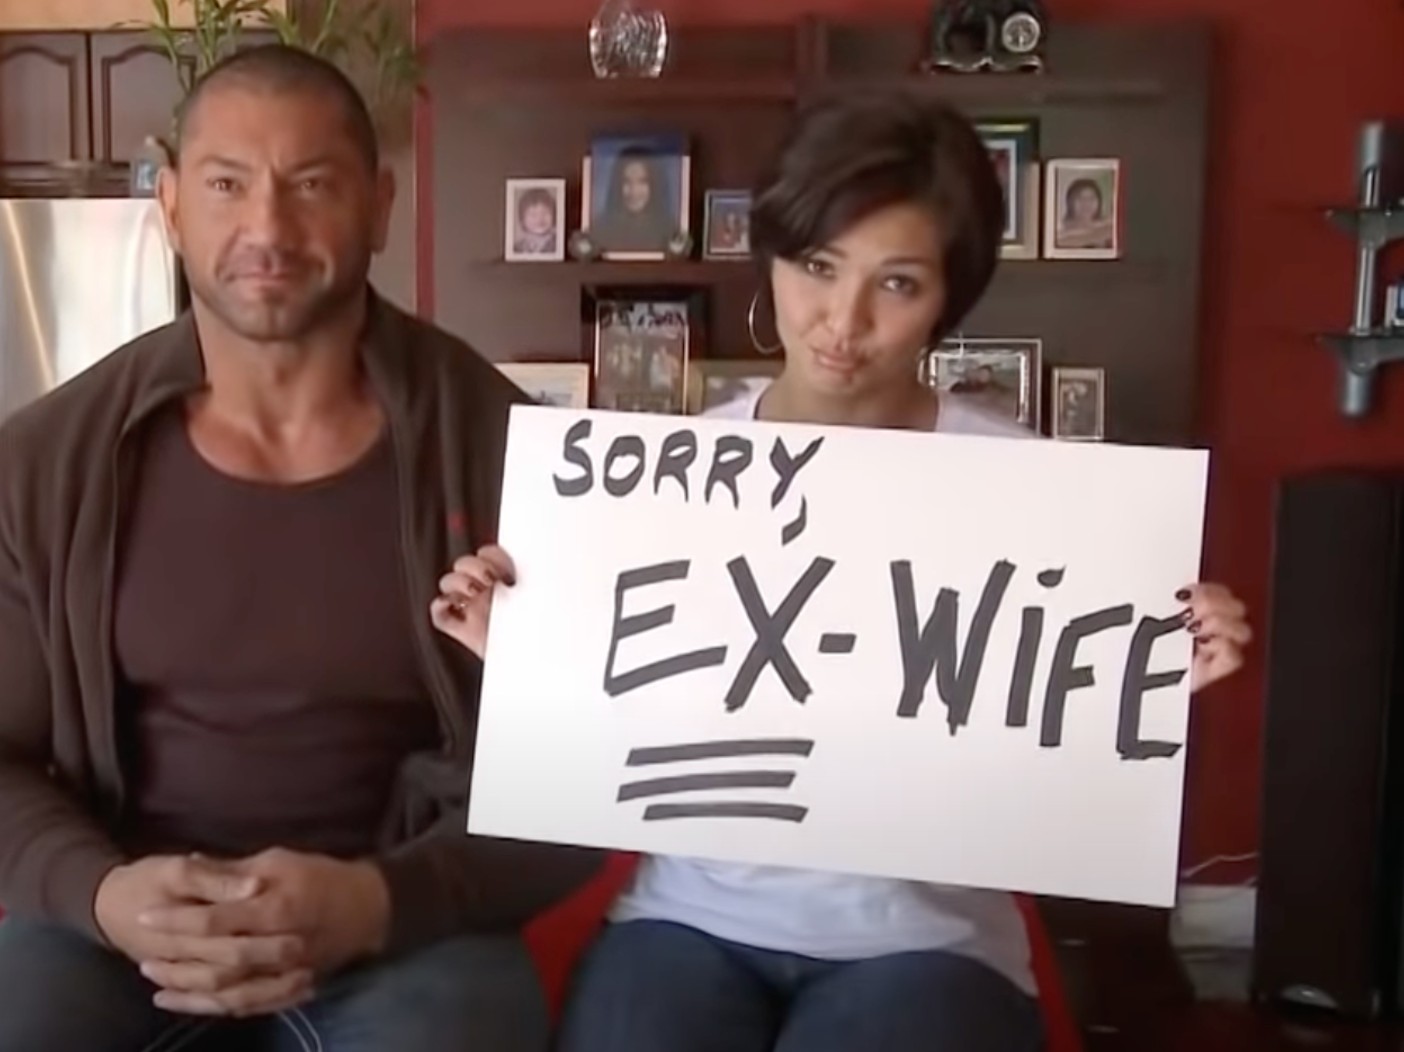 Glenda Bautista and her ex-husband Dave Bautista with Glenda holding a white sheet that says "sorry, ex-wife"